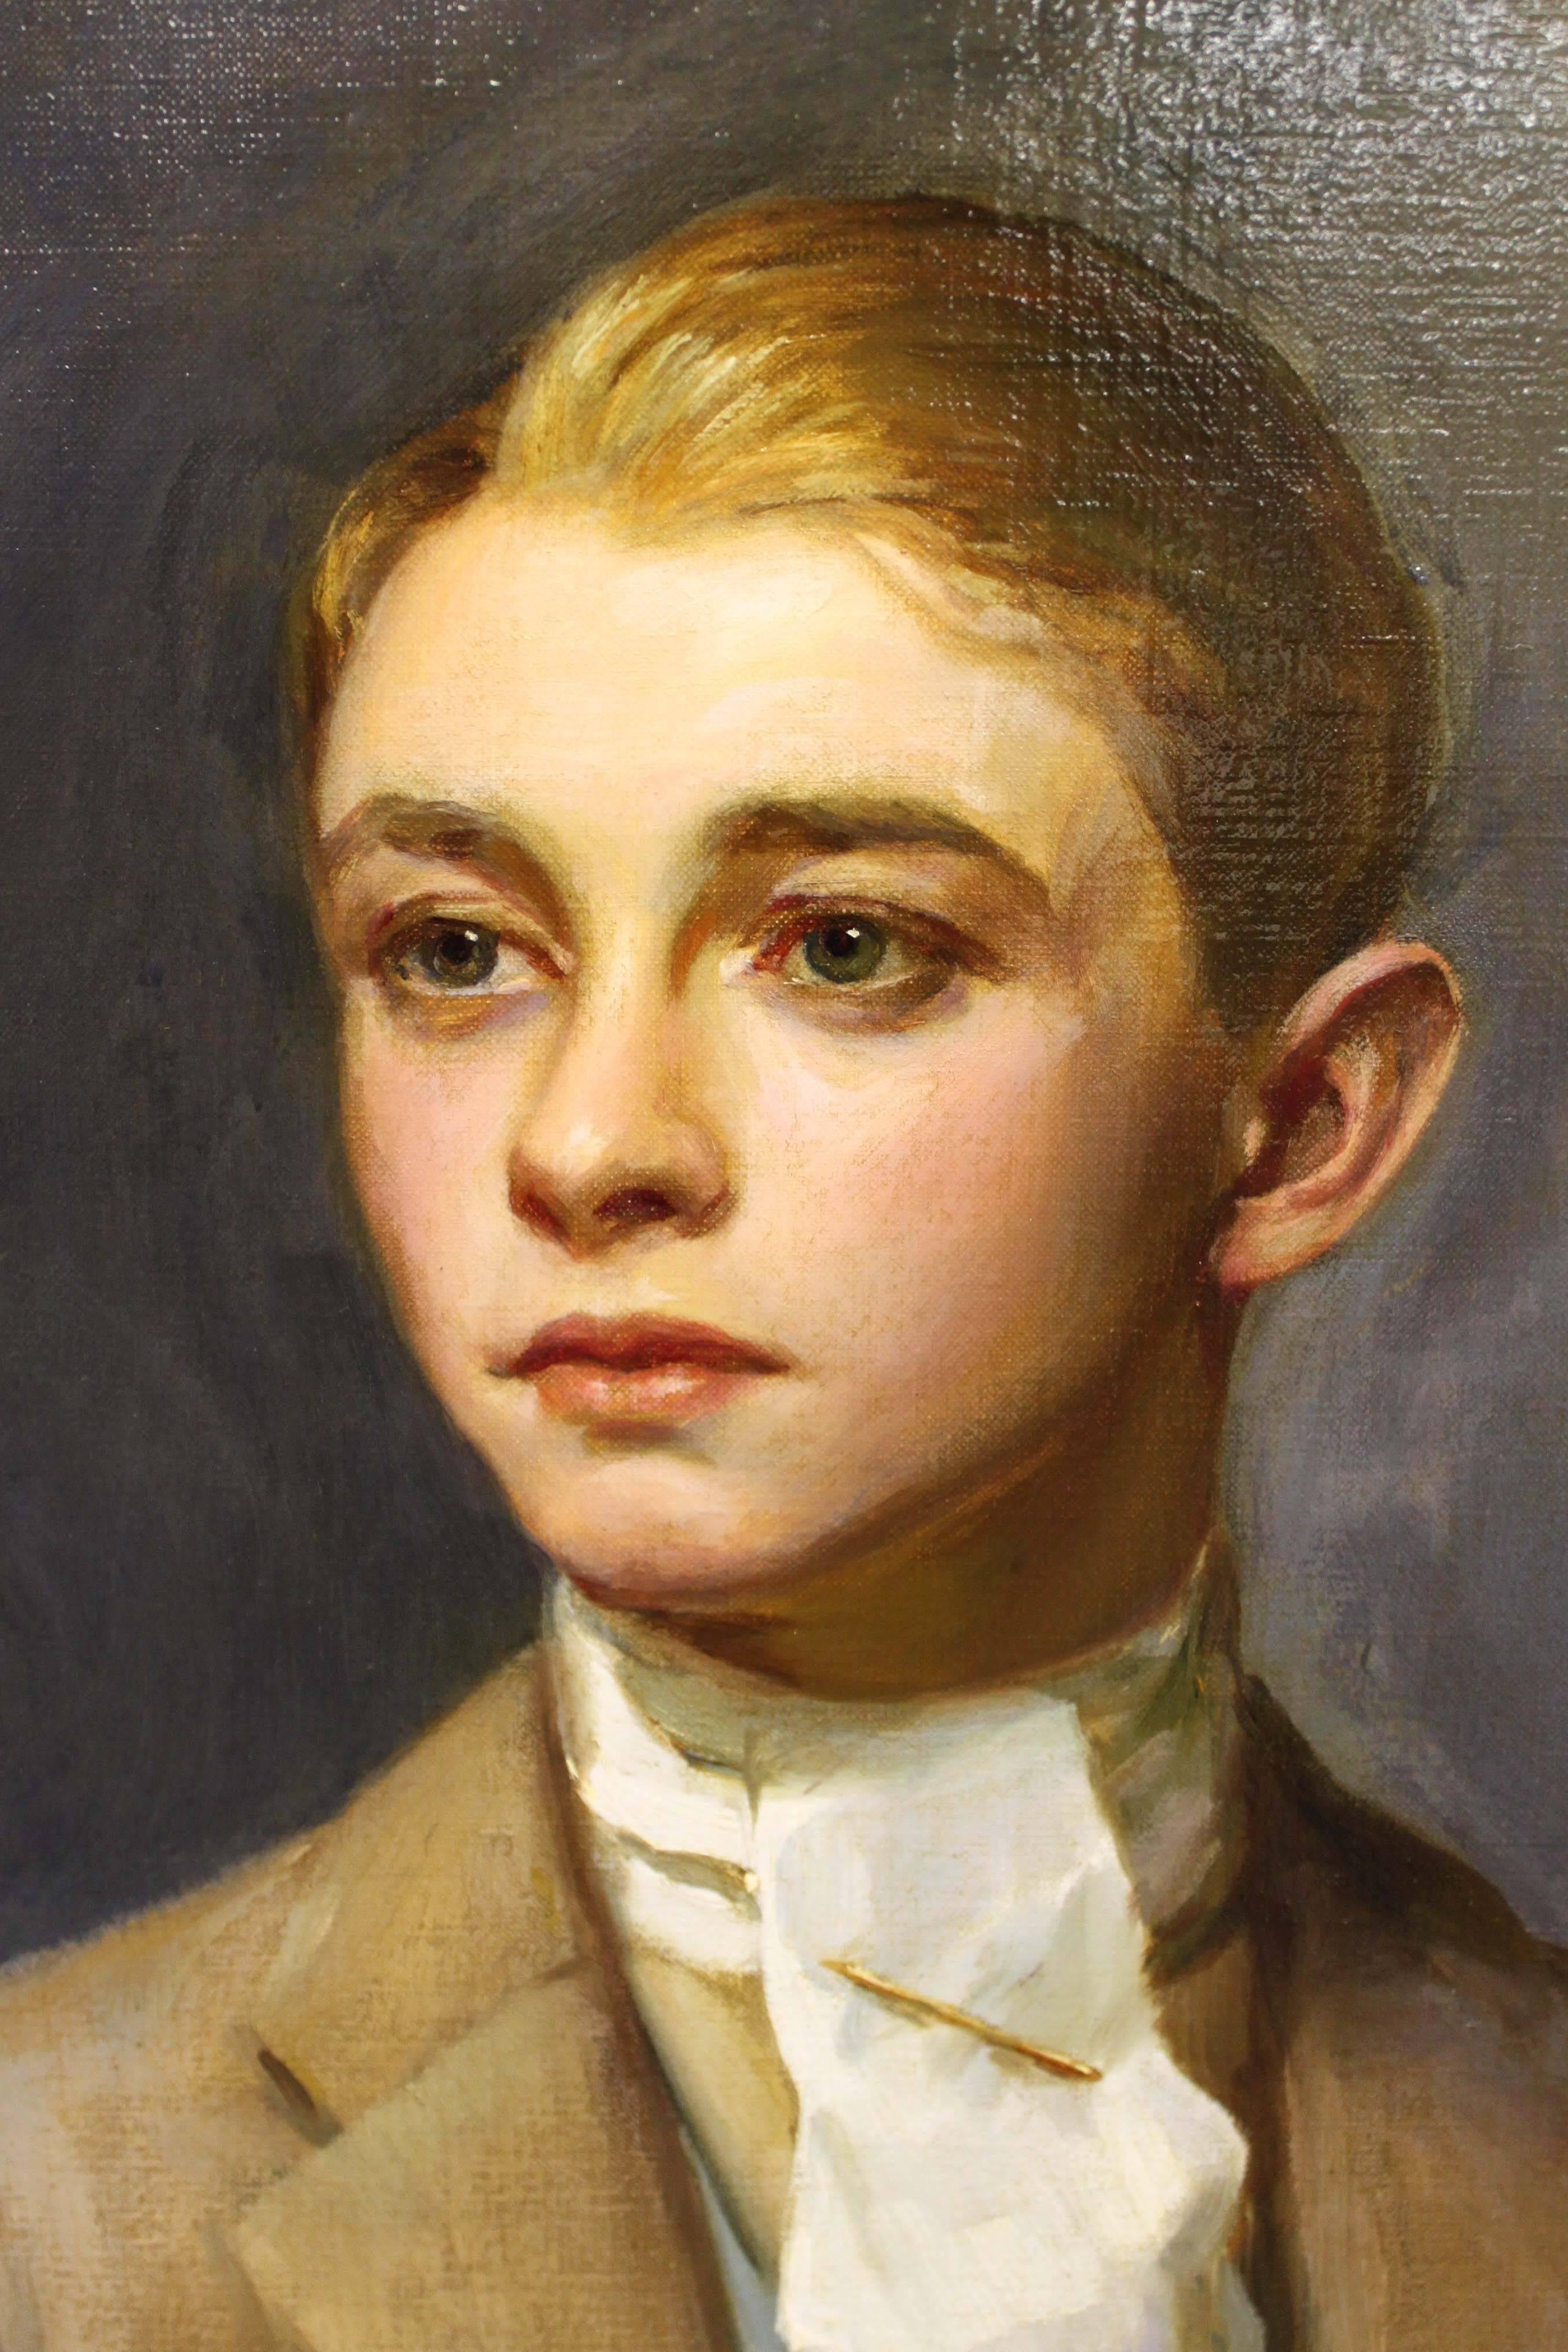 Portrait of a young man, oil on canvas attributed to English painter Oswald Birley. This painting was originally larger, likely life-size/standing and was cut down possibly when the owner moved to a smaller residence. It's speculated that the